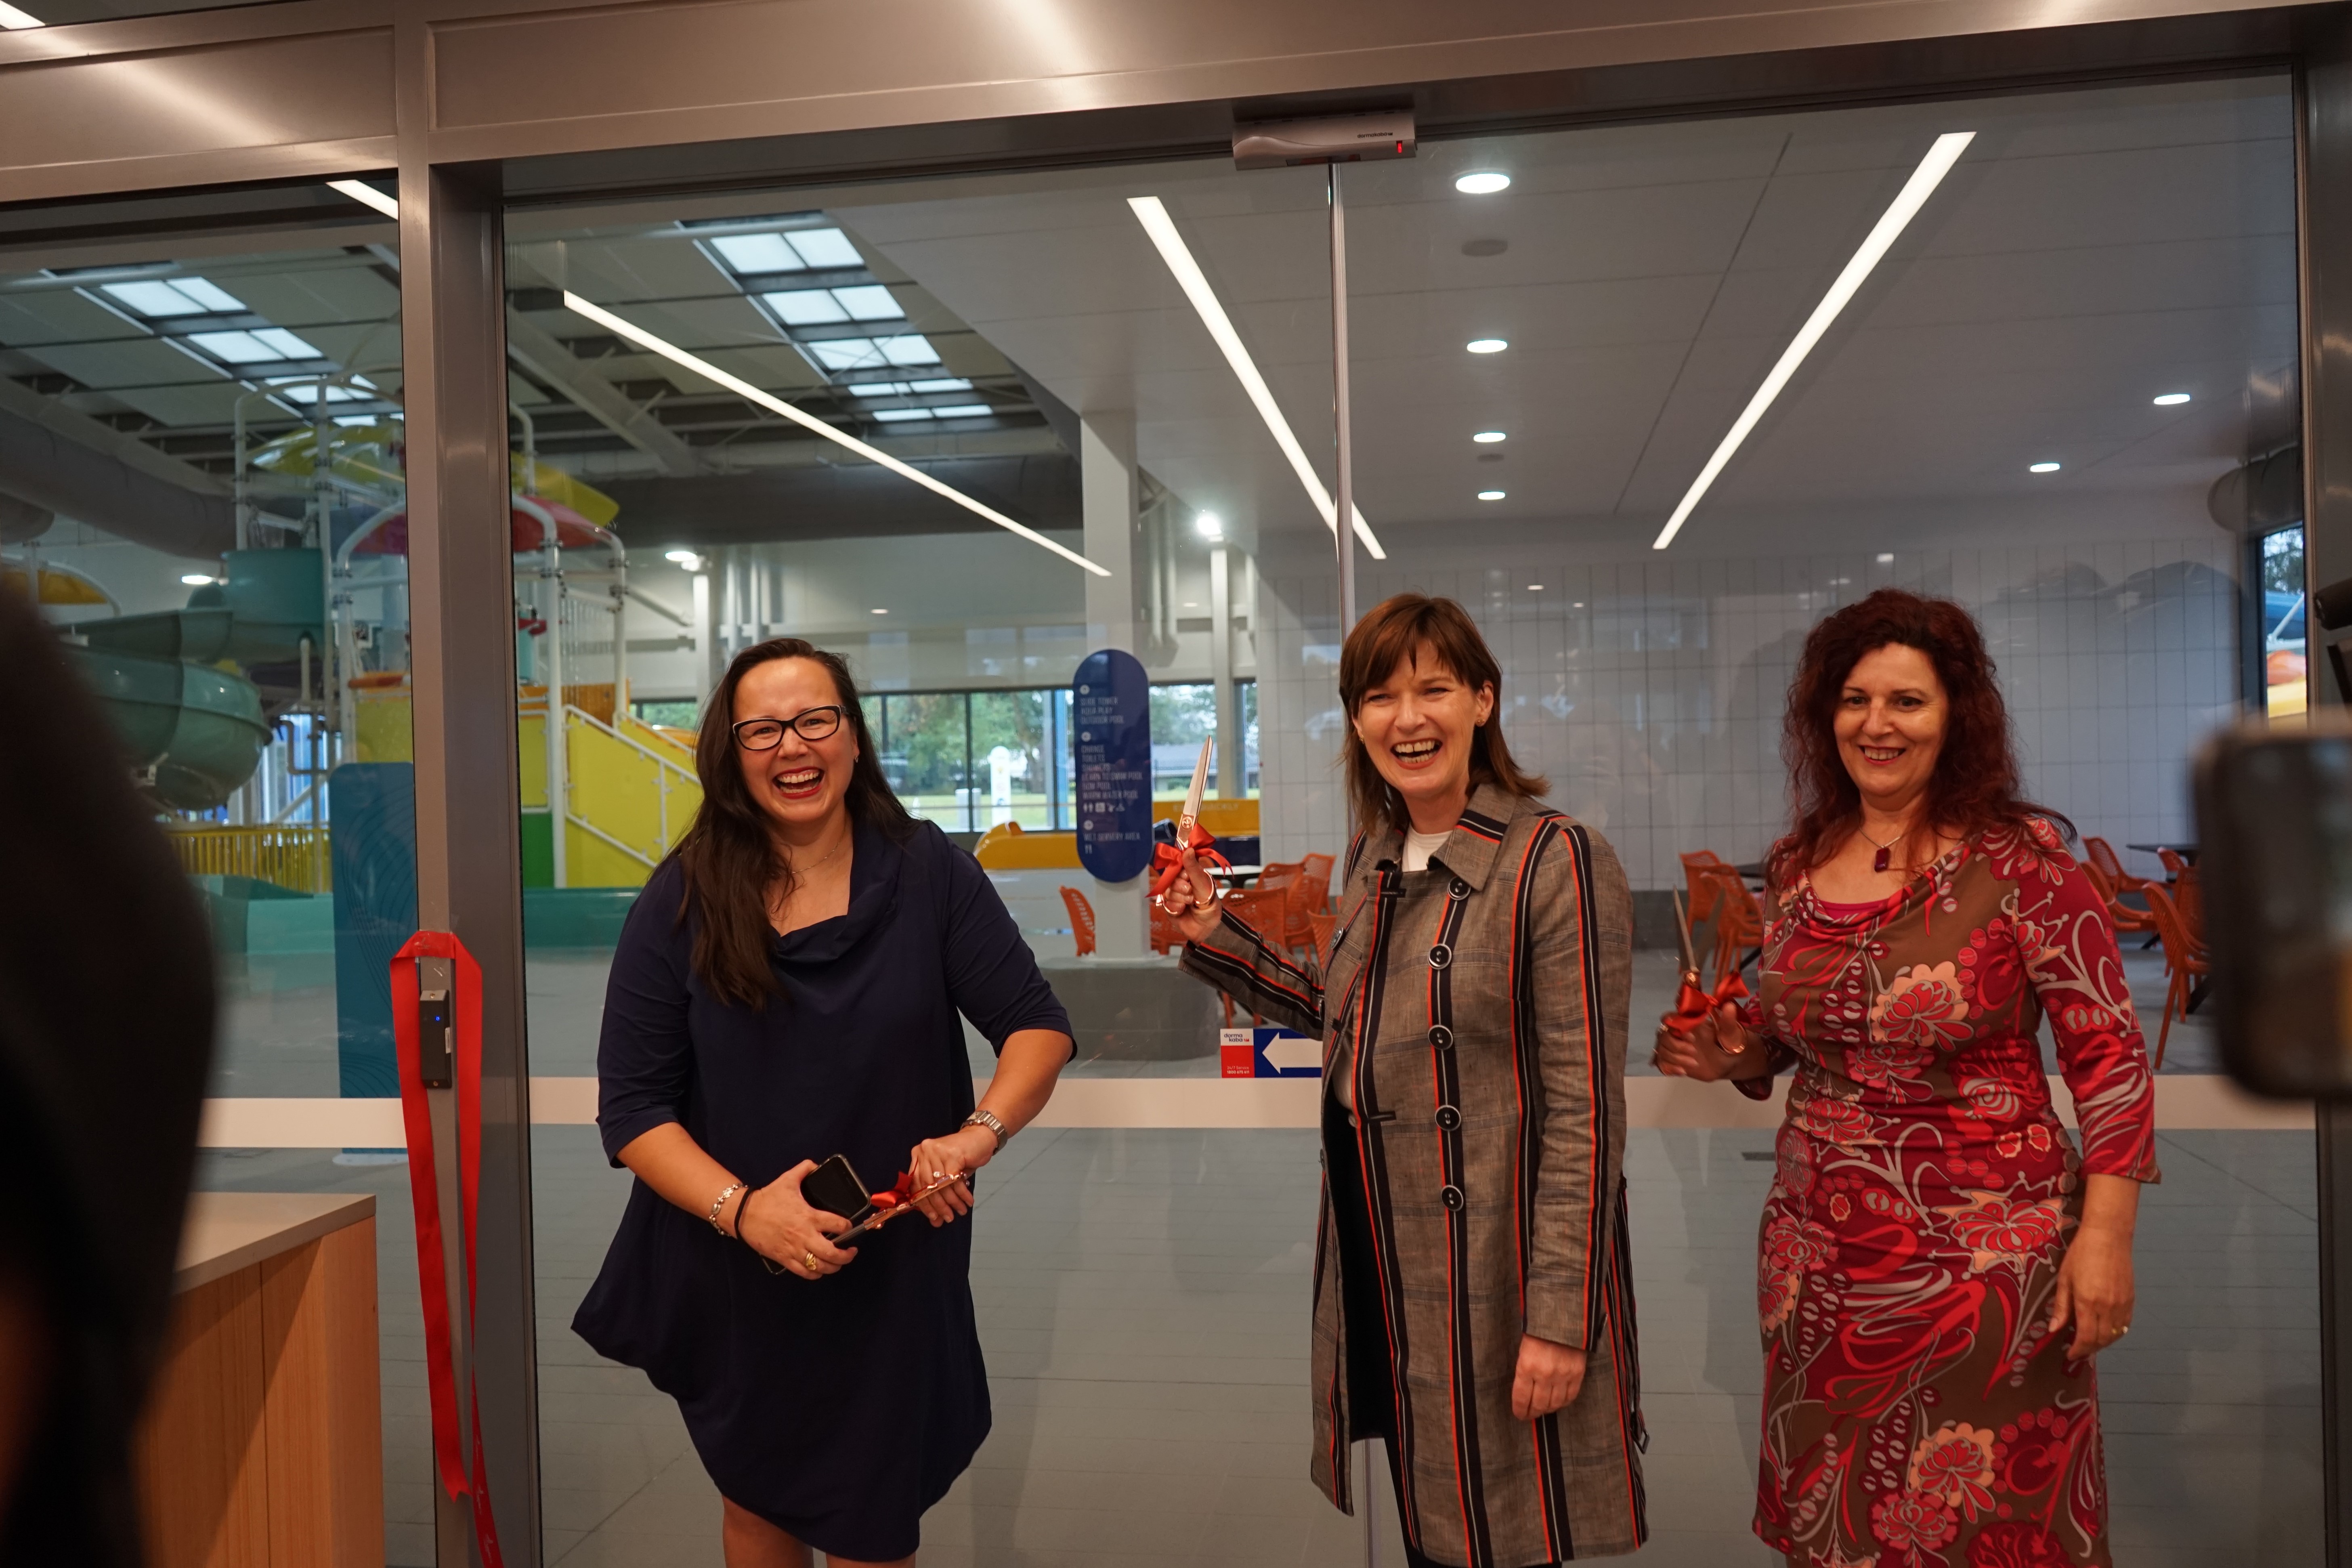 Harriet Shing MP, Mary-Anne Thomas MP and Cr Sharon Gibson cut the ribbon on the official opening of the GRAC